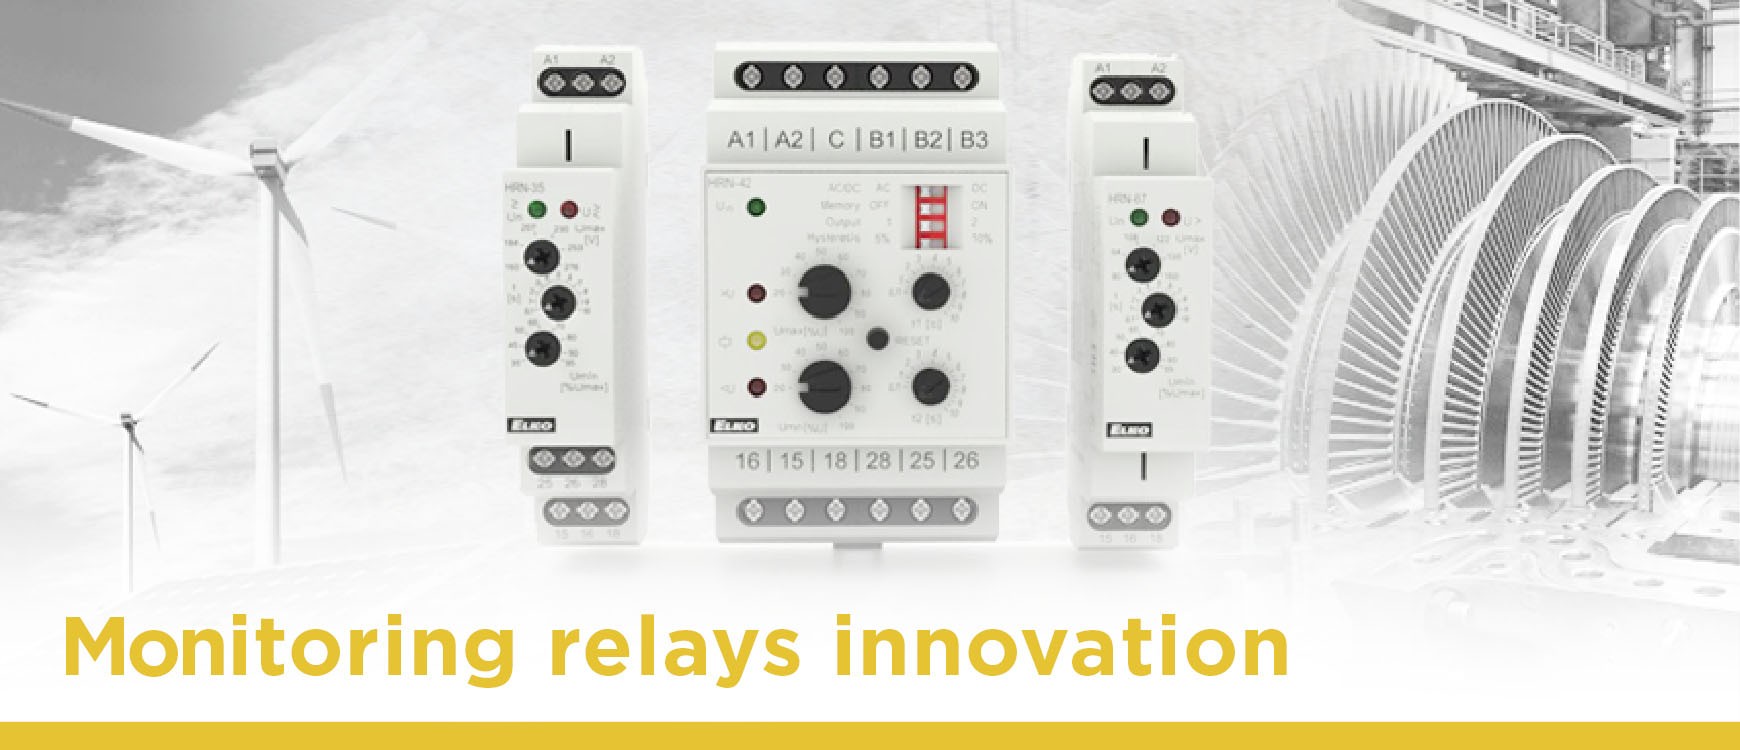 Meet our innovative monitoring relays photo